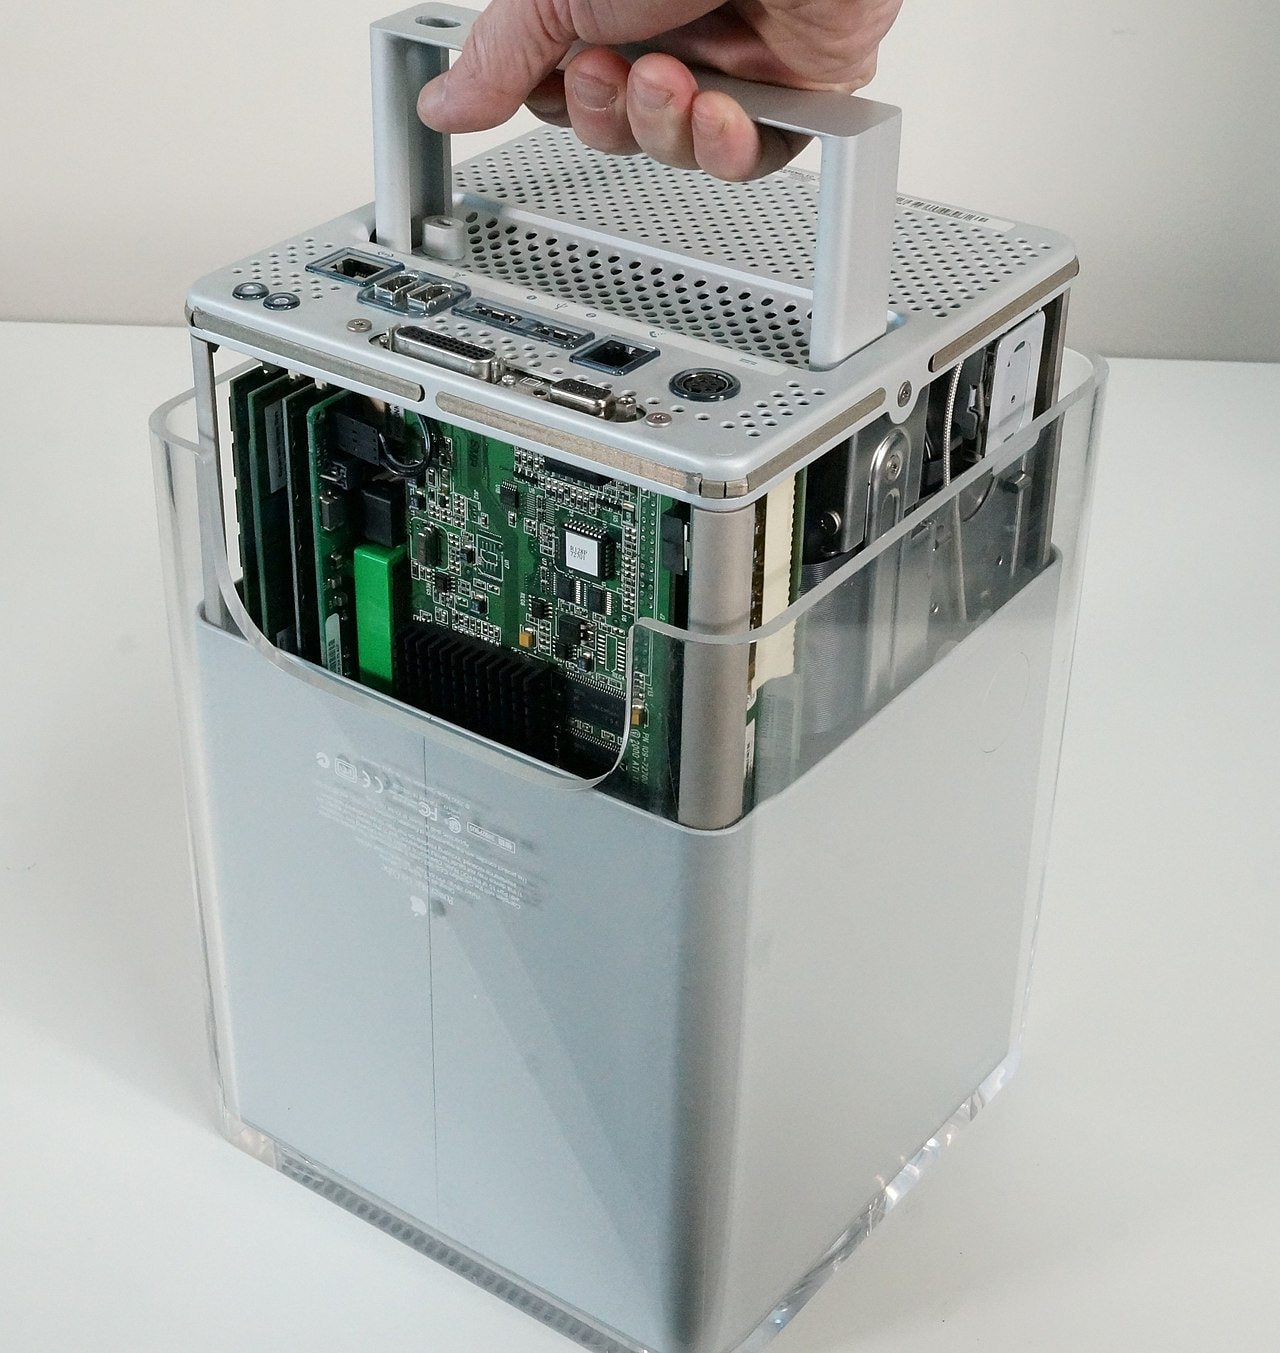 As with the new 2019 Mac Pro design, the guts of Apple Power Mac G4 Cube were easy to access.